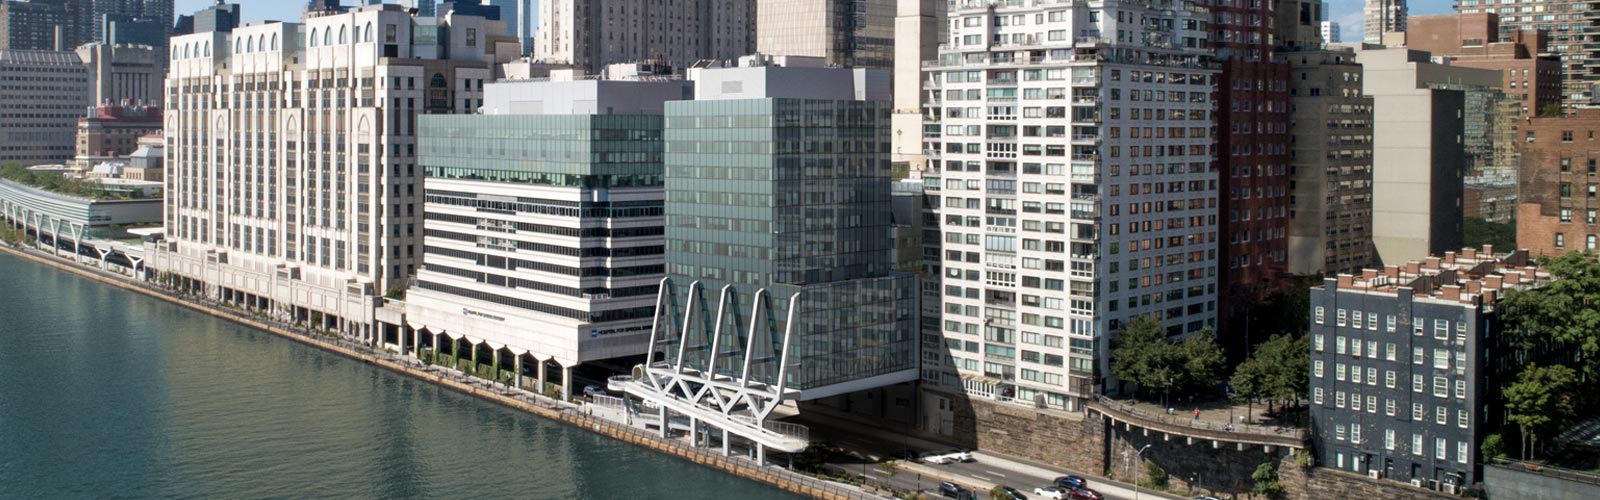 Photo of HSS Main Hospital and the River Building from across the East River.